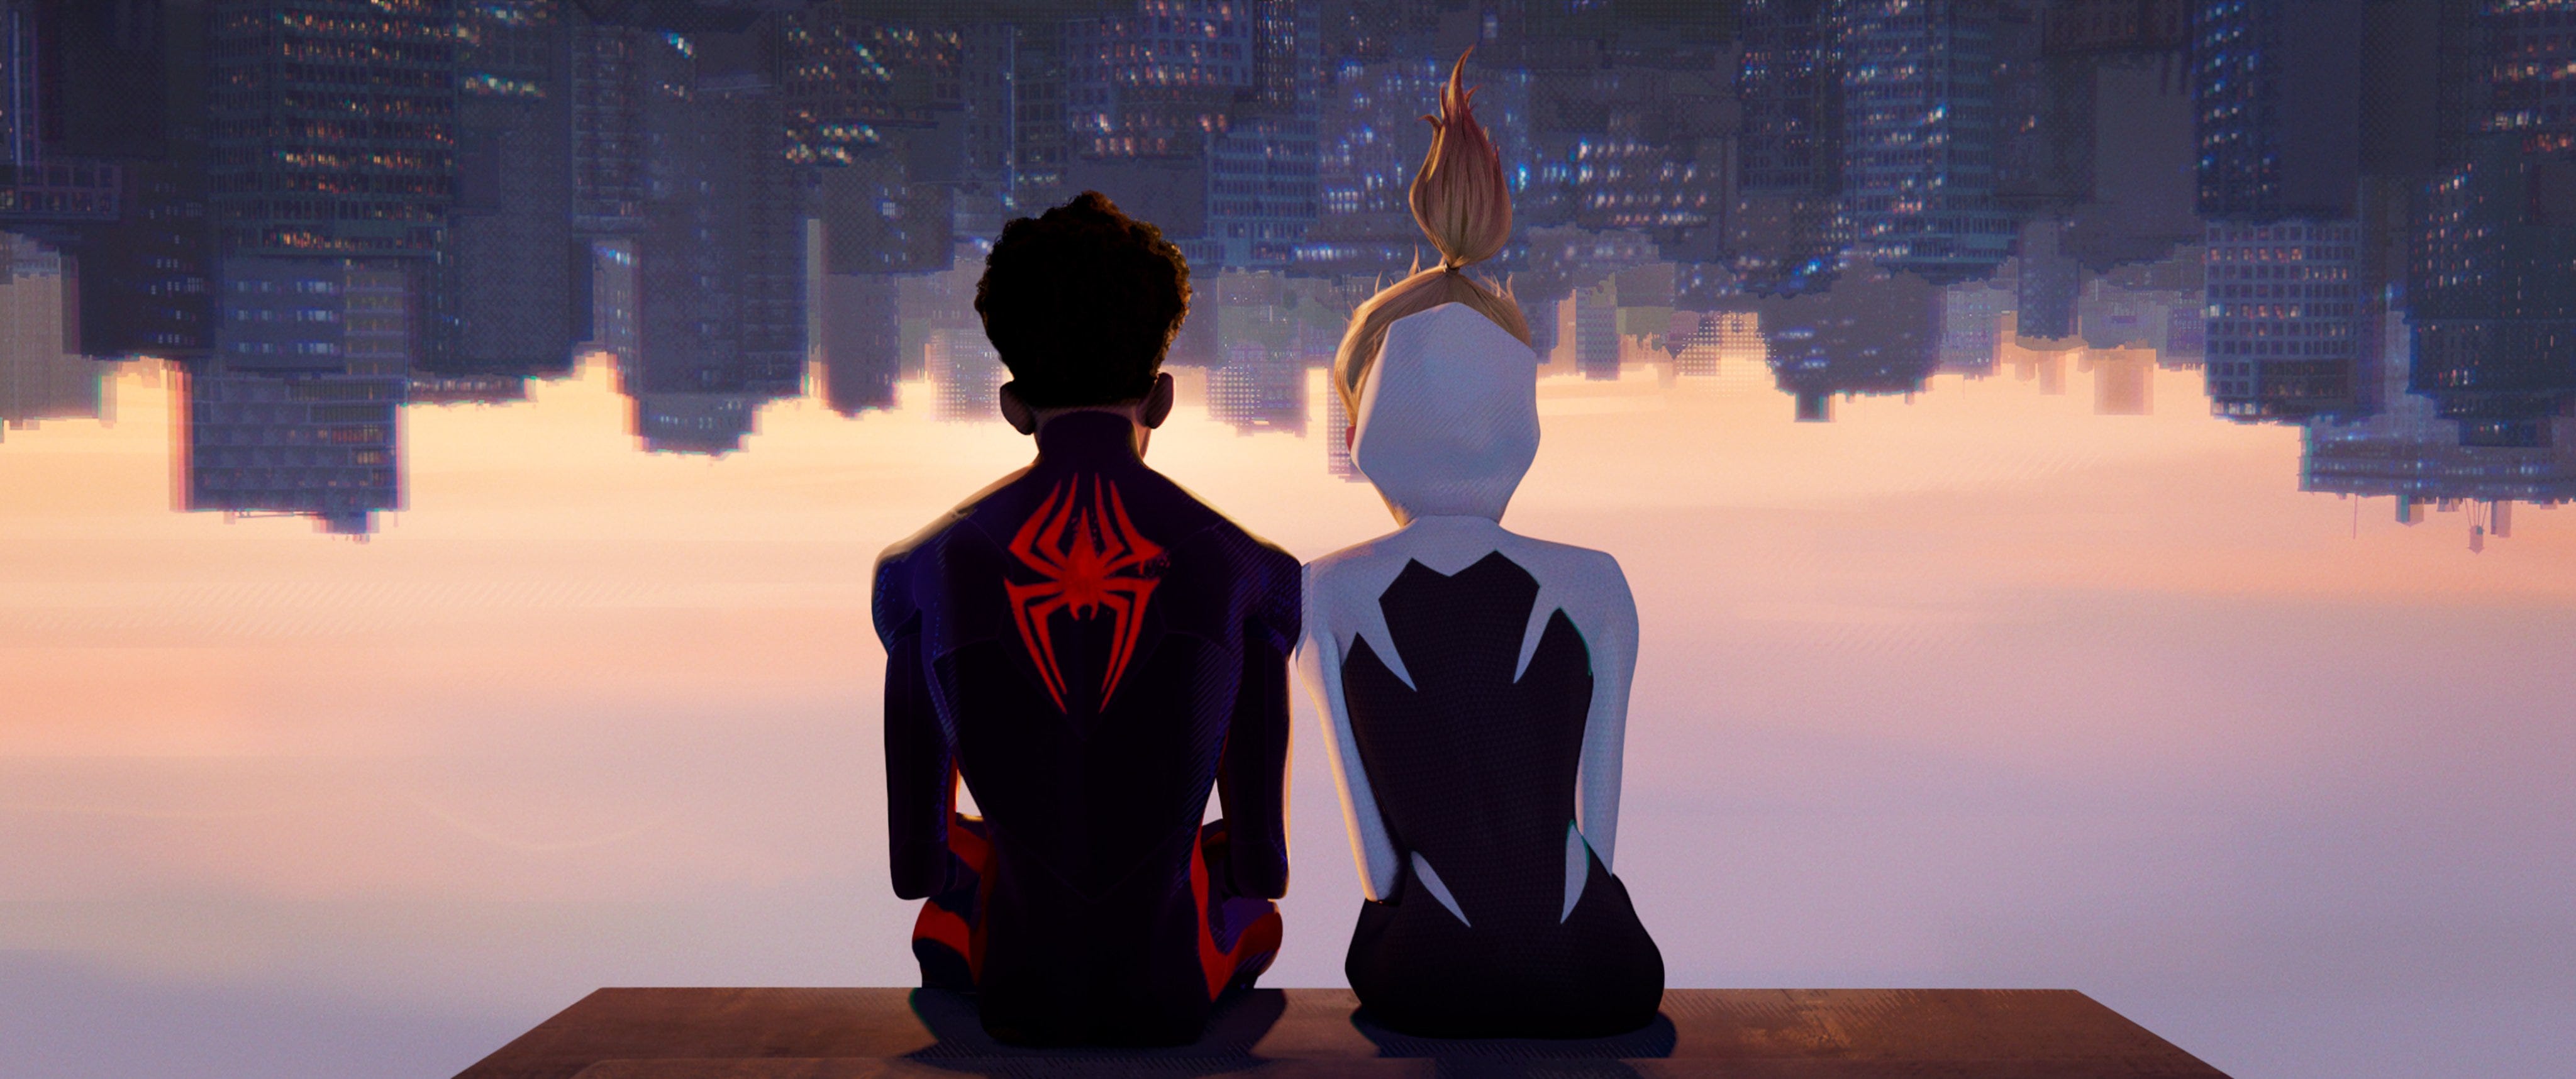 Spider-Man: Across the Spider-Verse' crawls into No. 1 spot at the